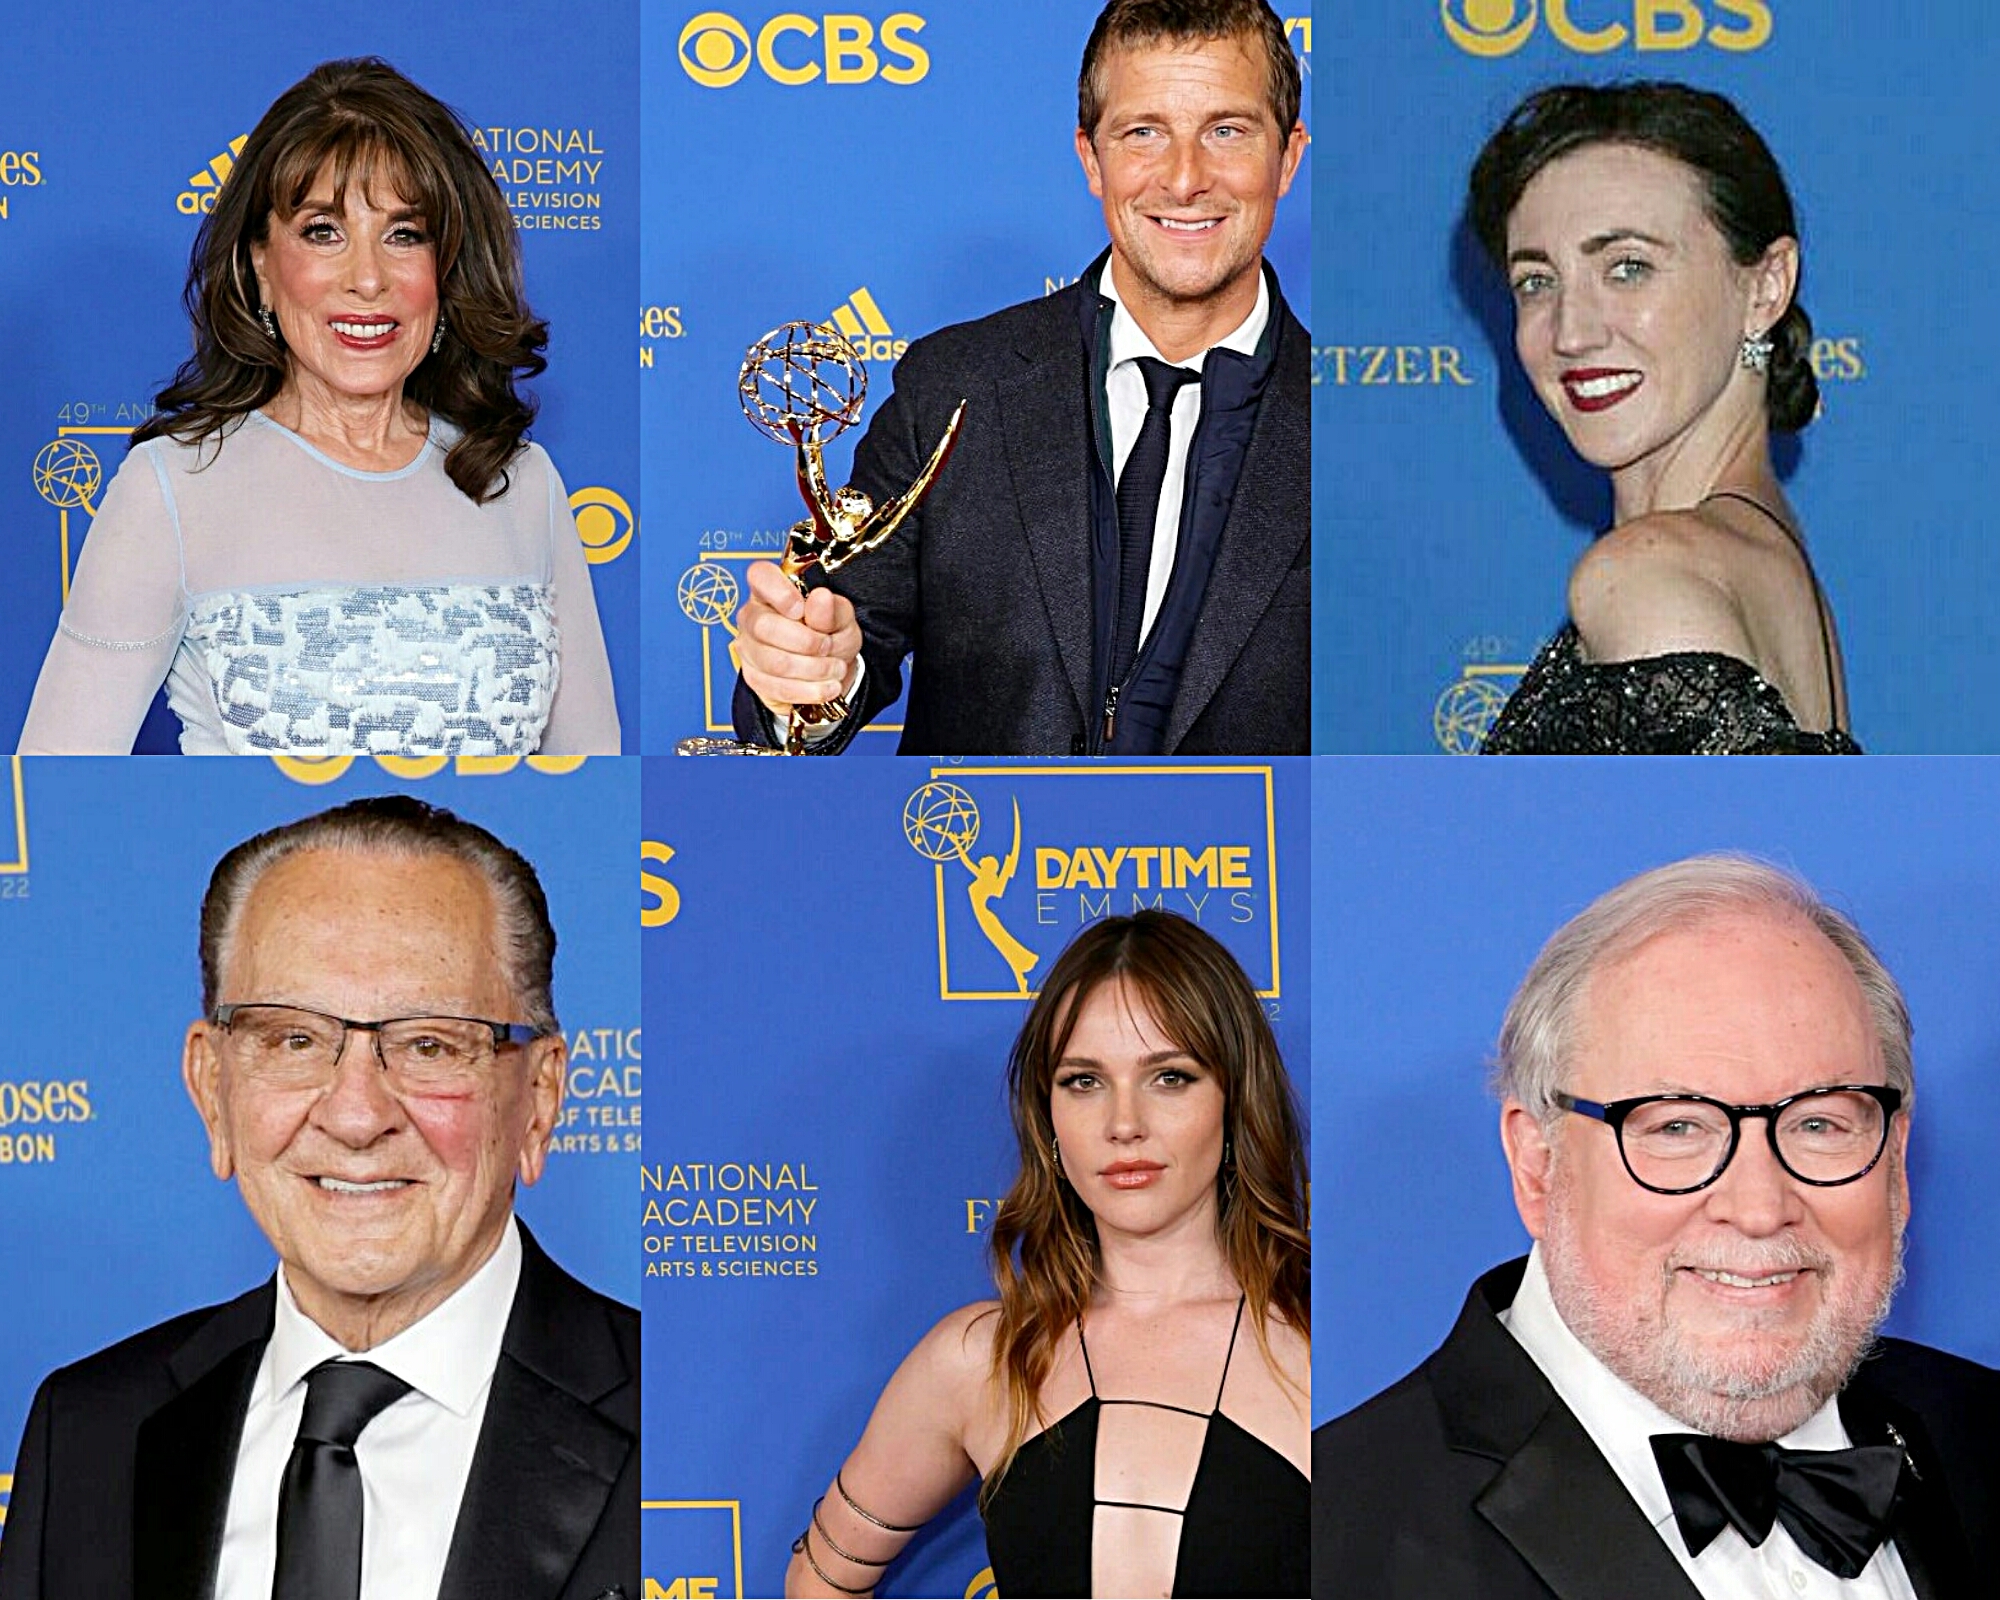 Kate Linder, Amber Martinez, Bear Grylls, Politician David Caprio, Judge Frank Caprio, and other Celebrities attend the 49th Annual Creative Arts and Lifestyle Daytime Emmys